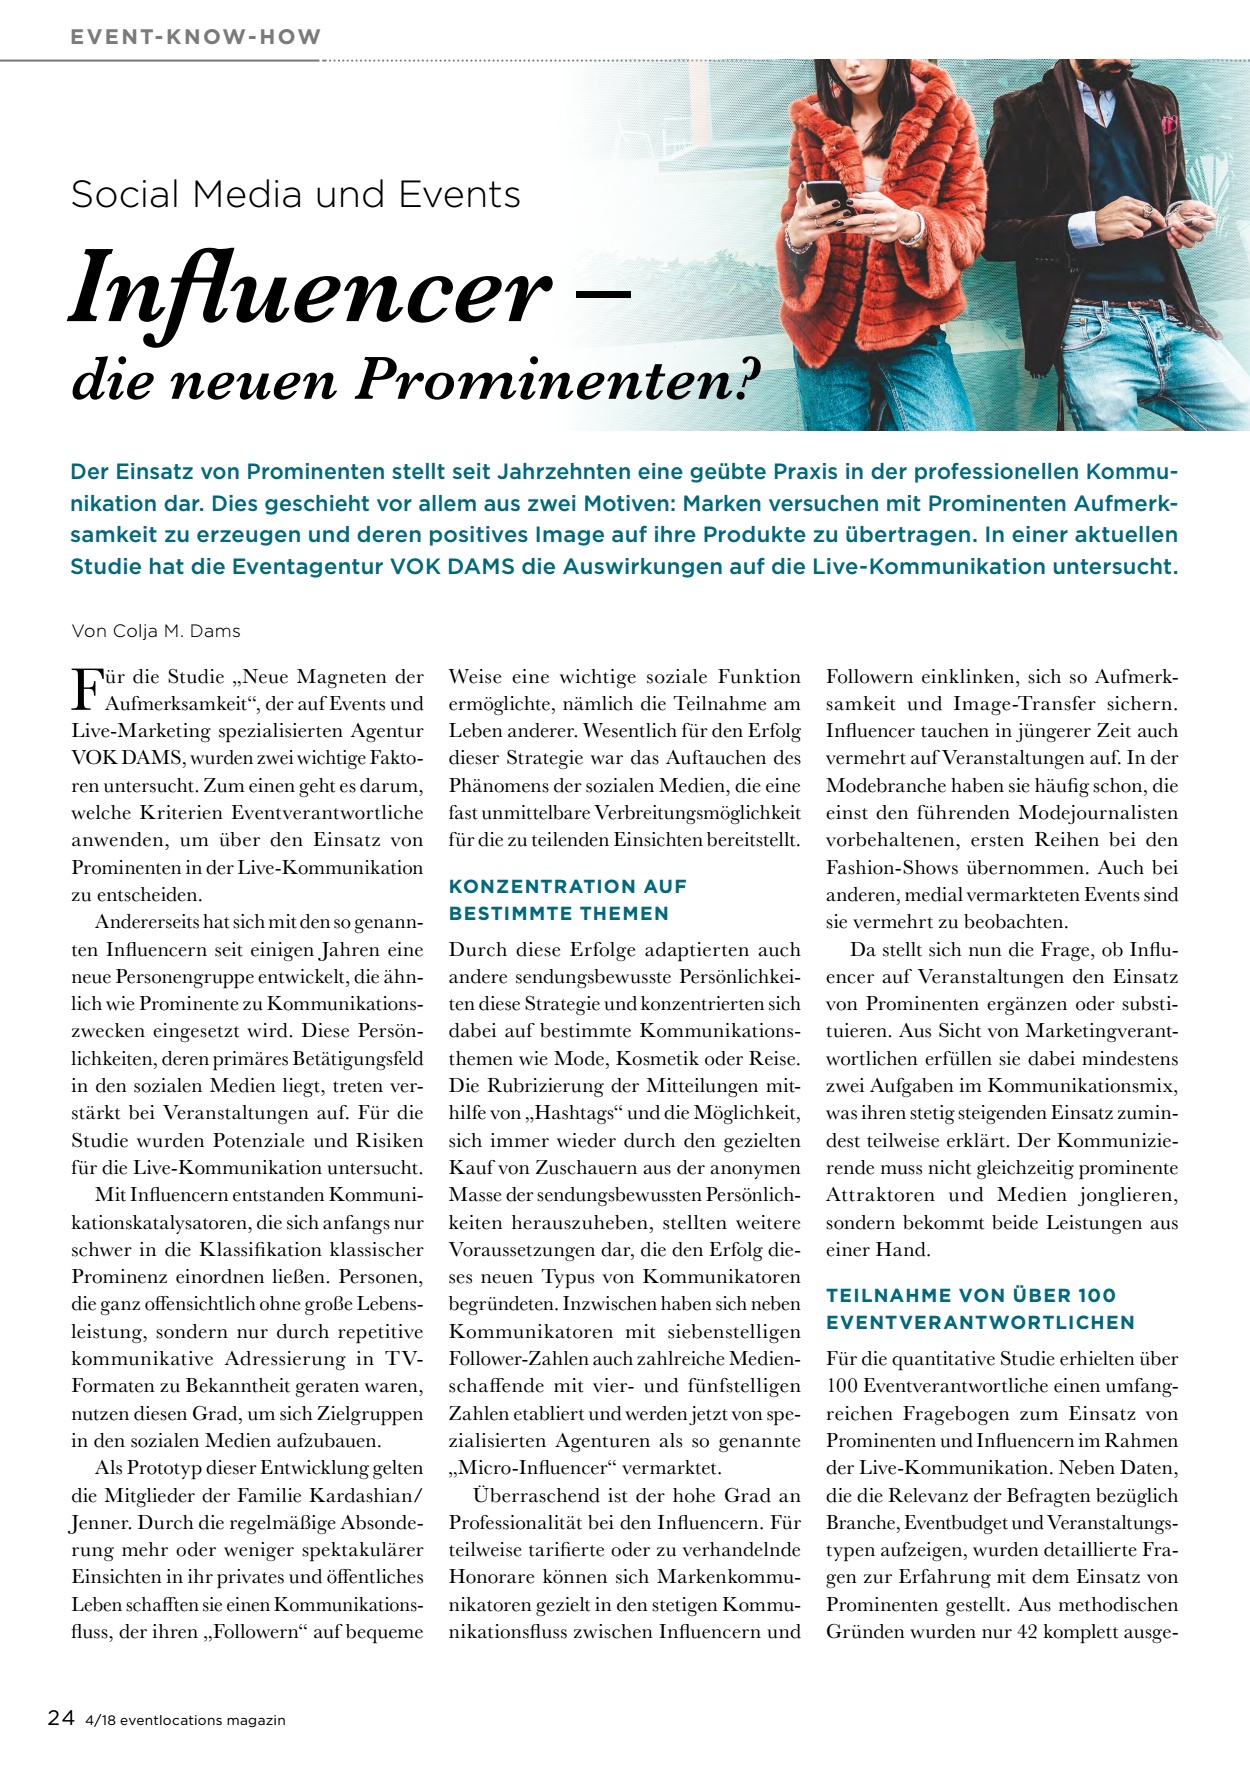 Influencer EVENT-KNOW-HOW Prominenten